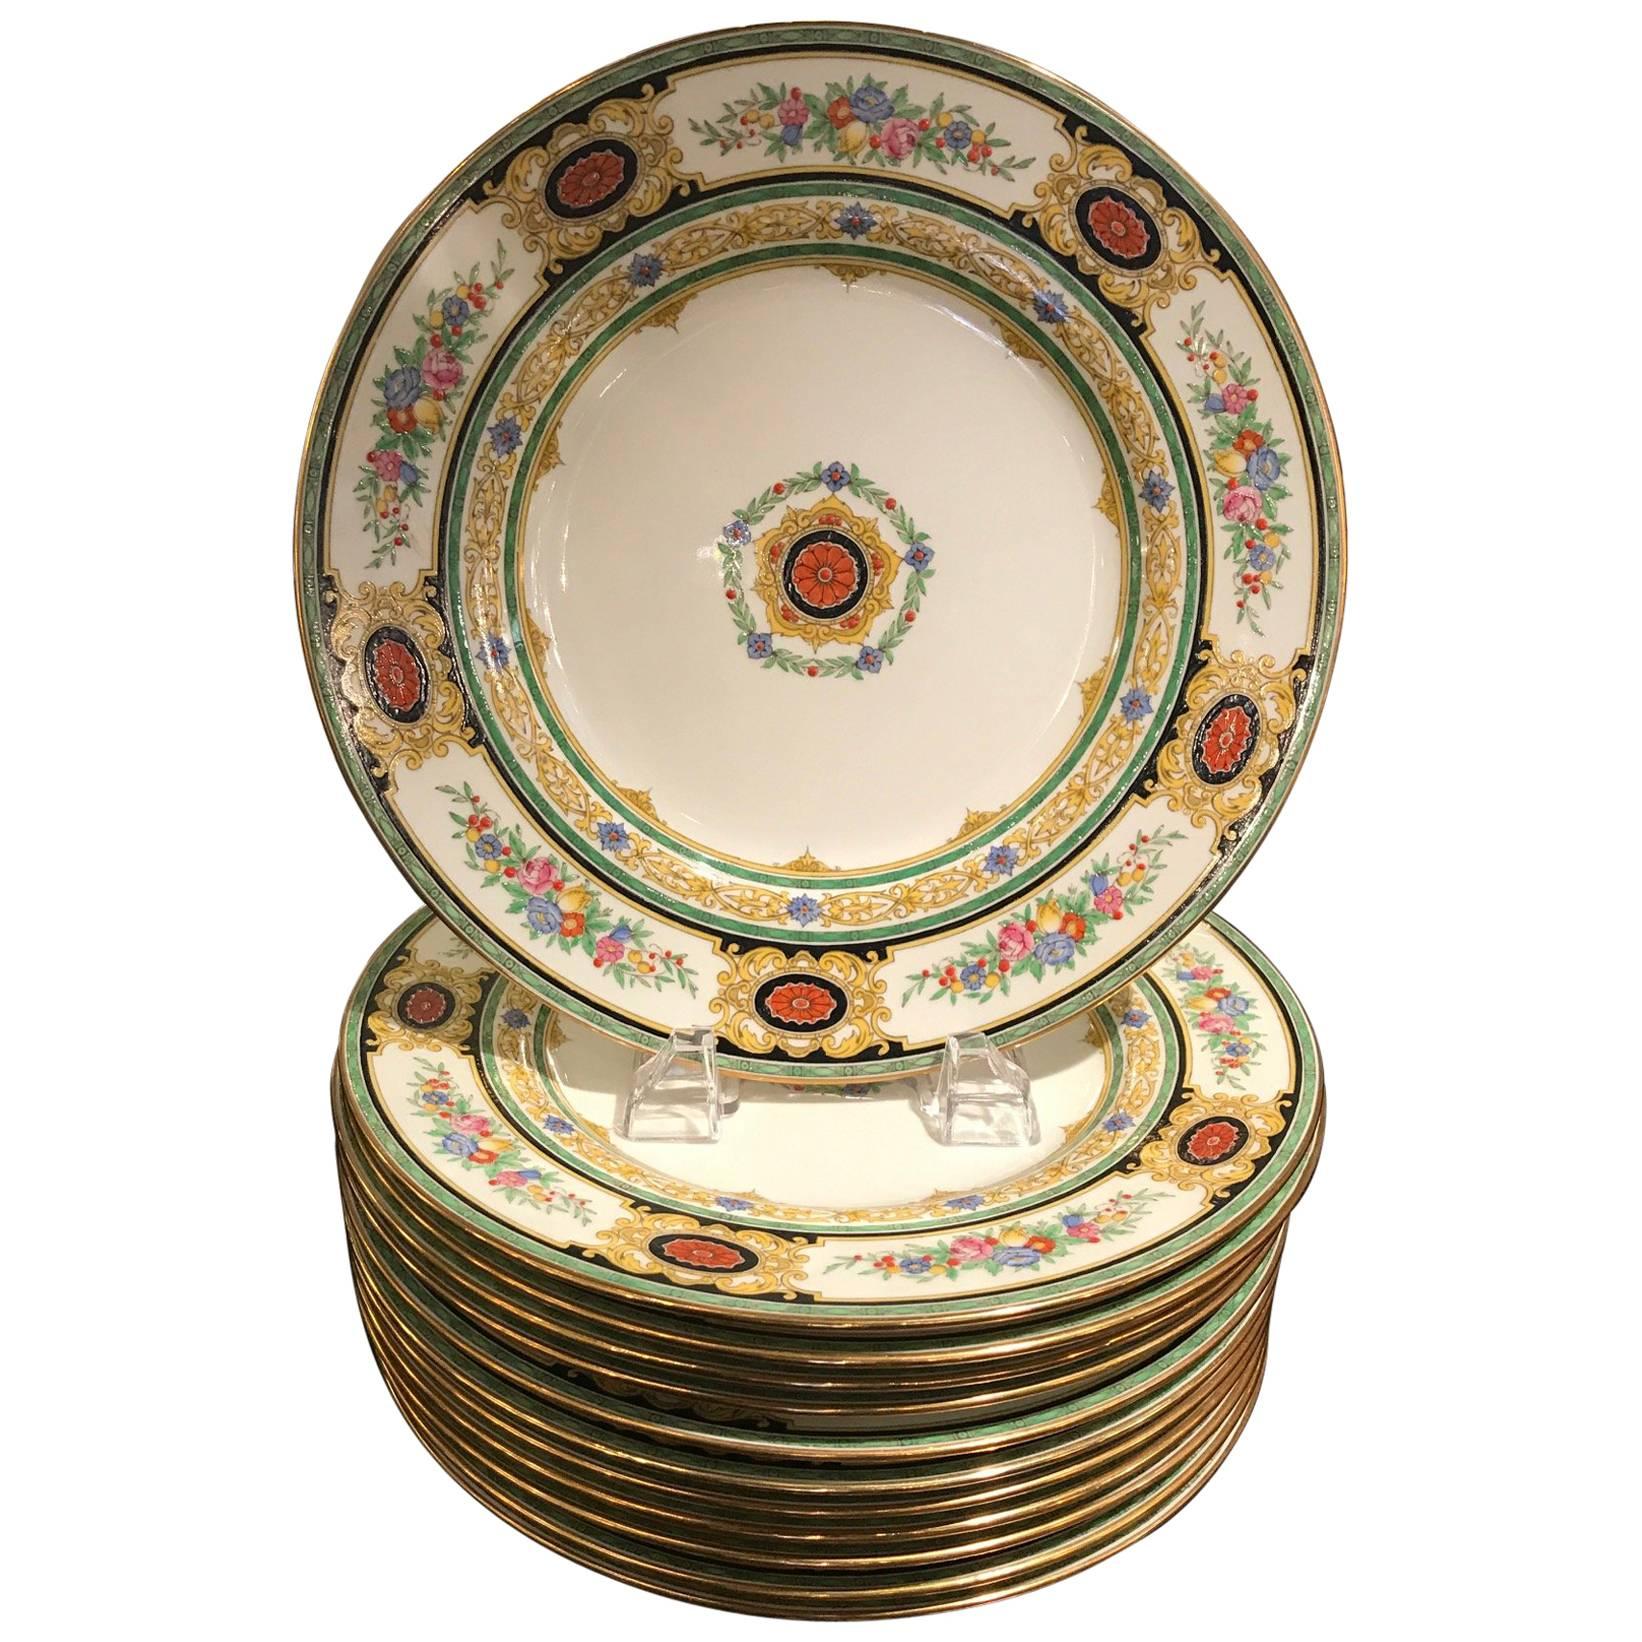 Set of 12 Hand-Painted English Dinner Service Plates by Minton